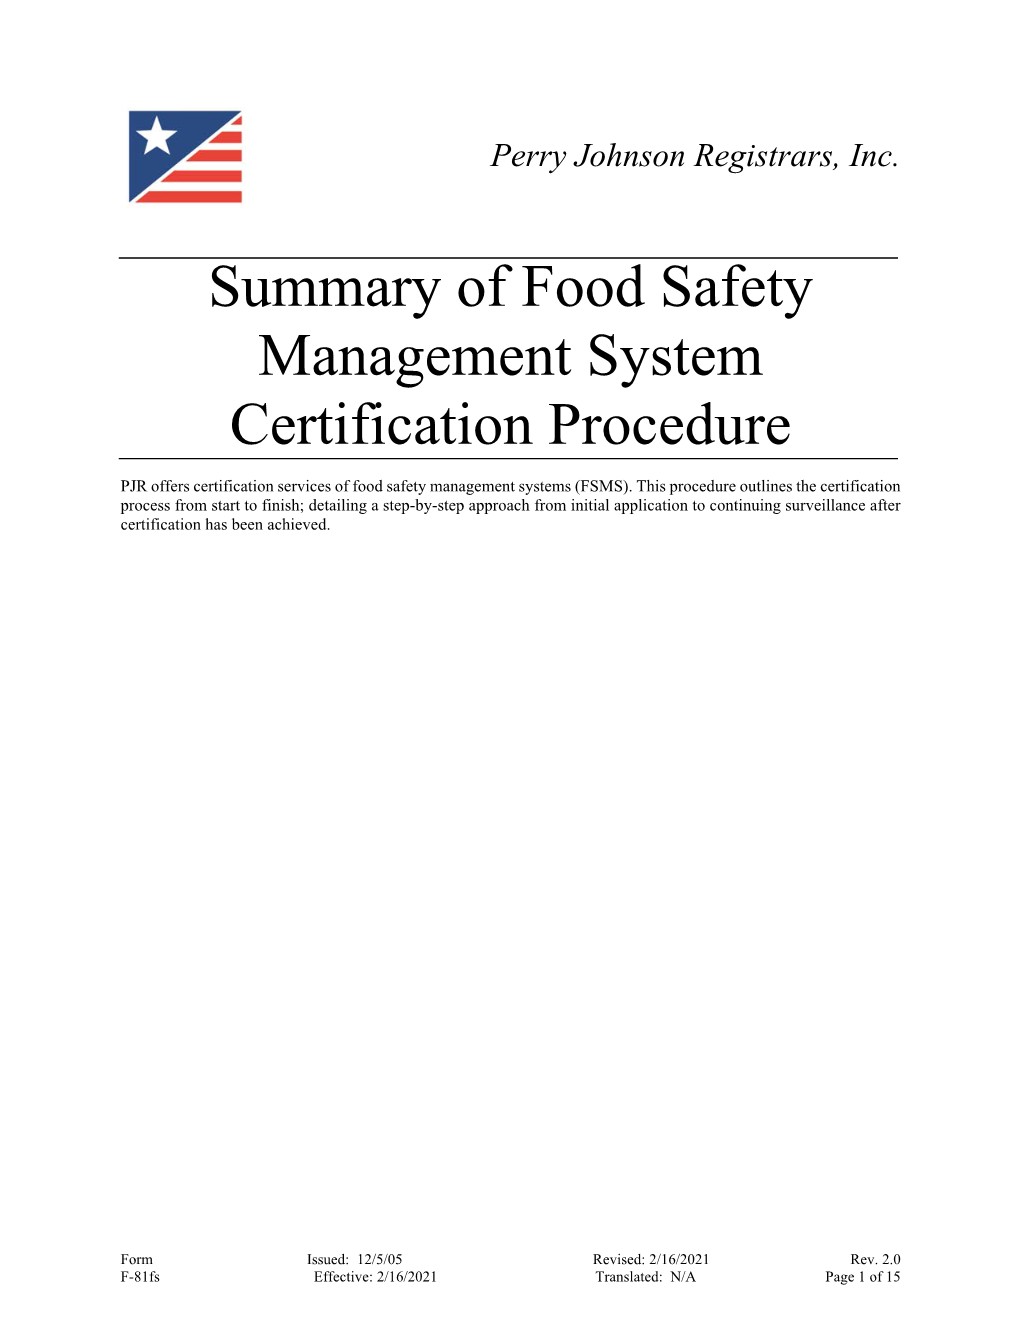 Summary of Food Safety Management System Certification Procedure